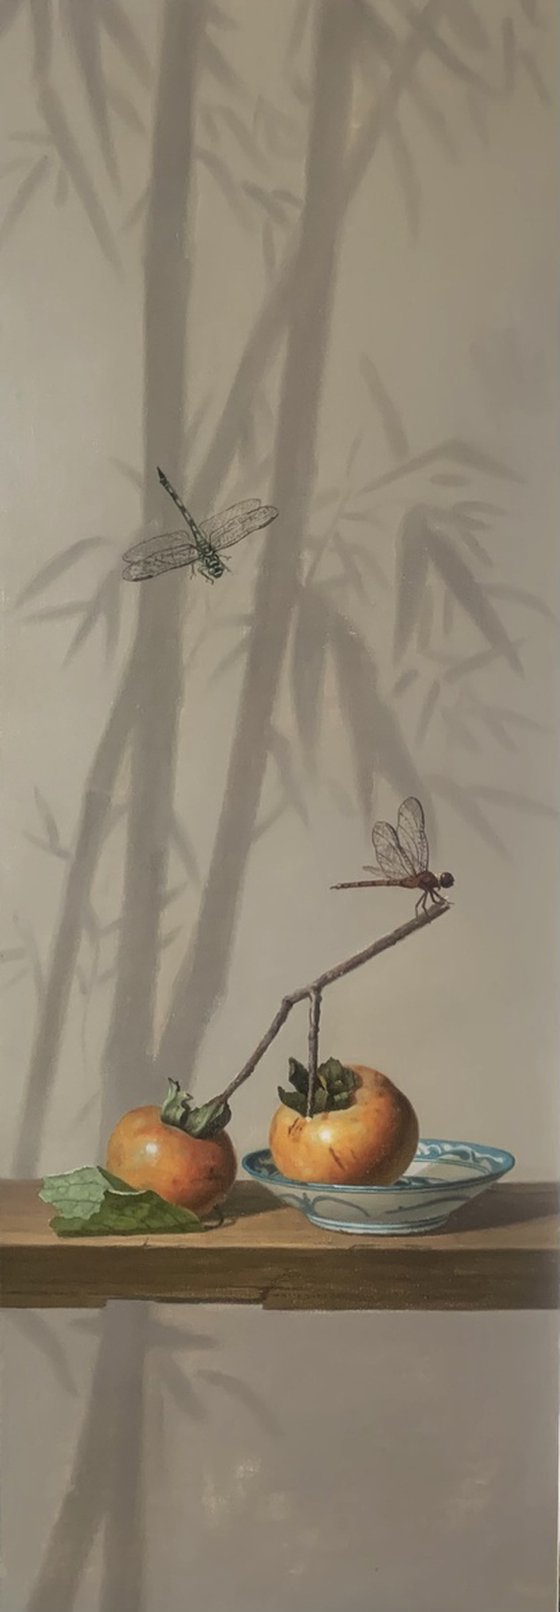 Still life:Persimmons with dragonflies t202